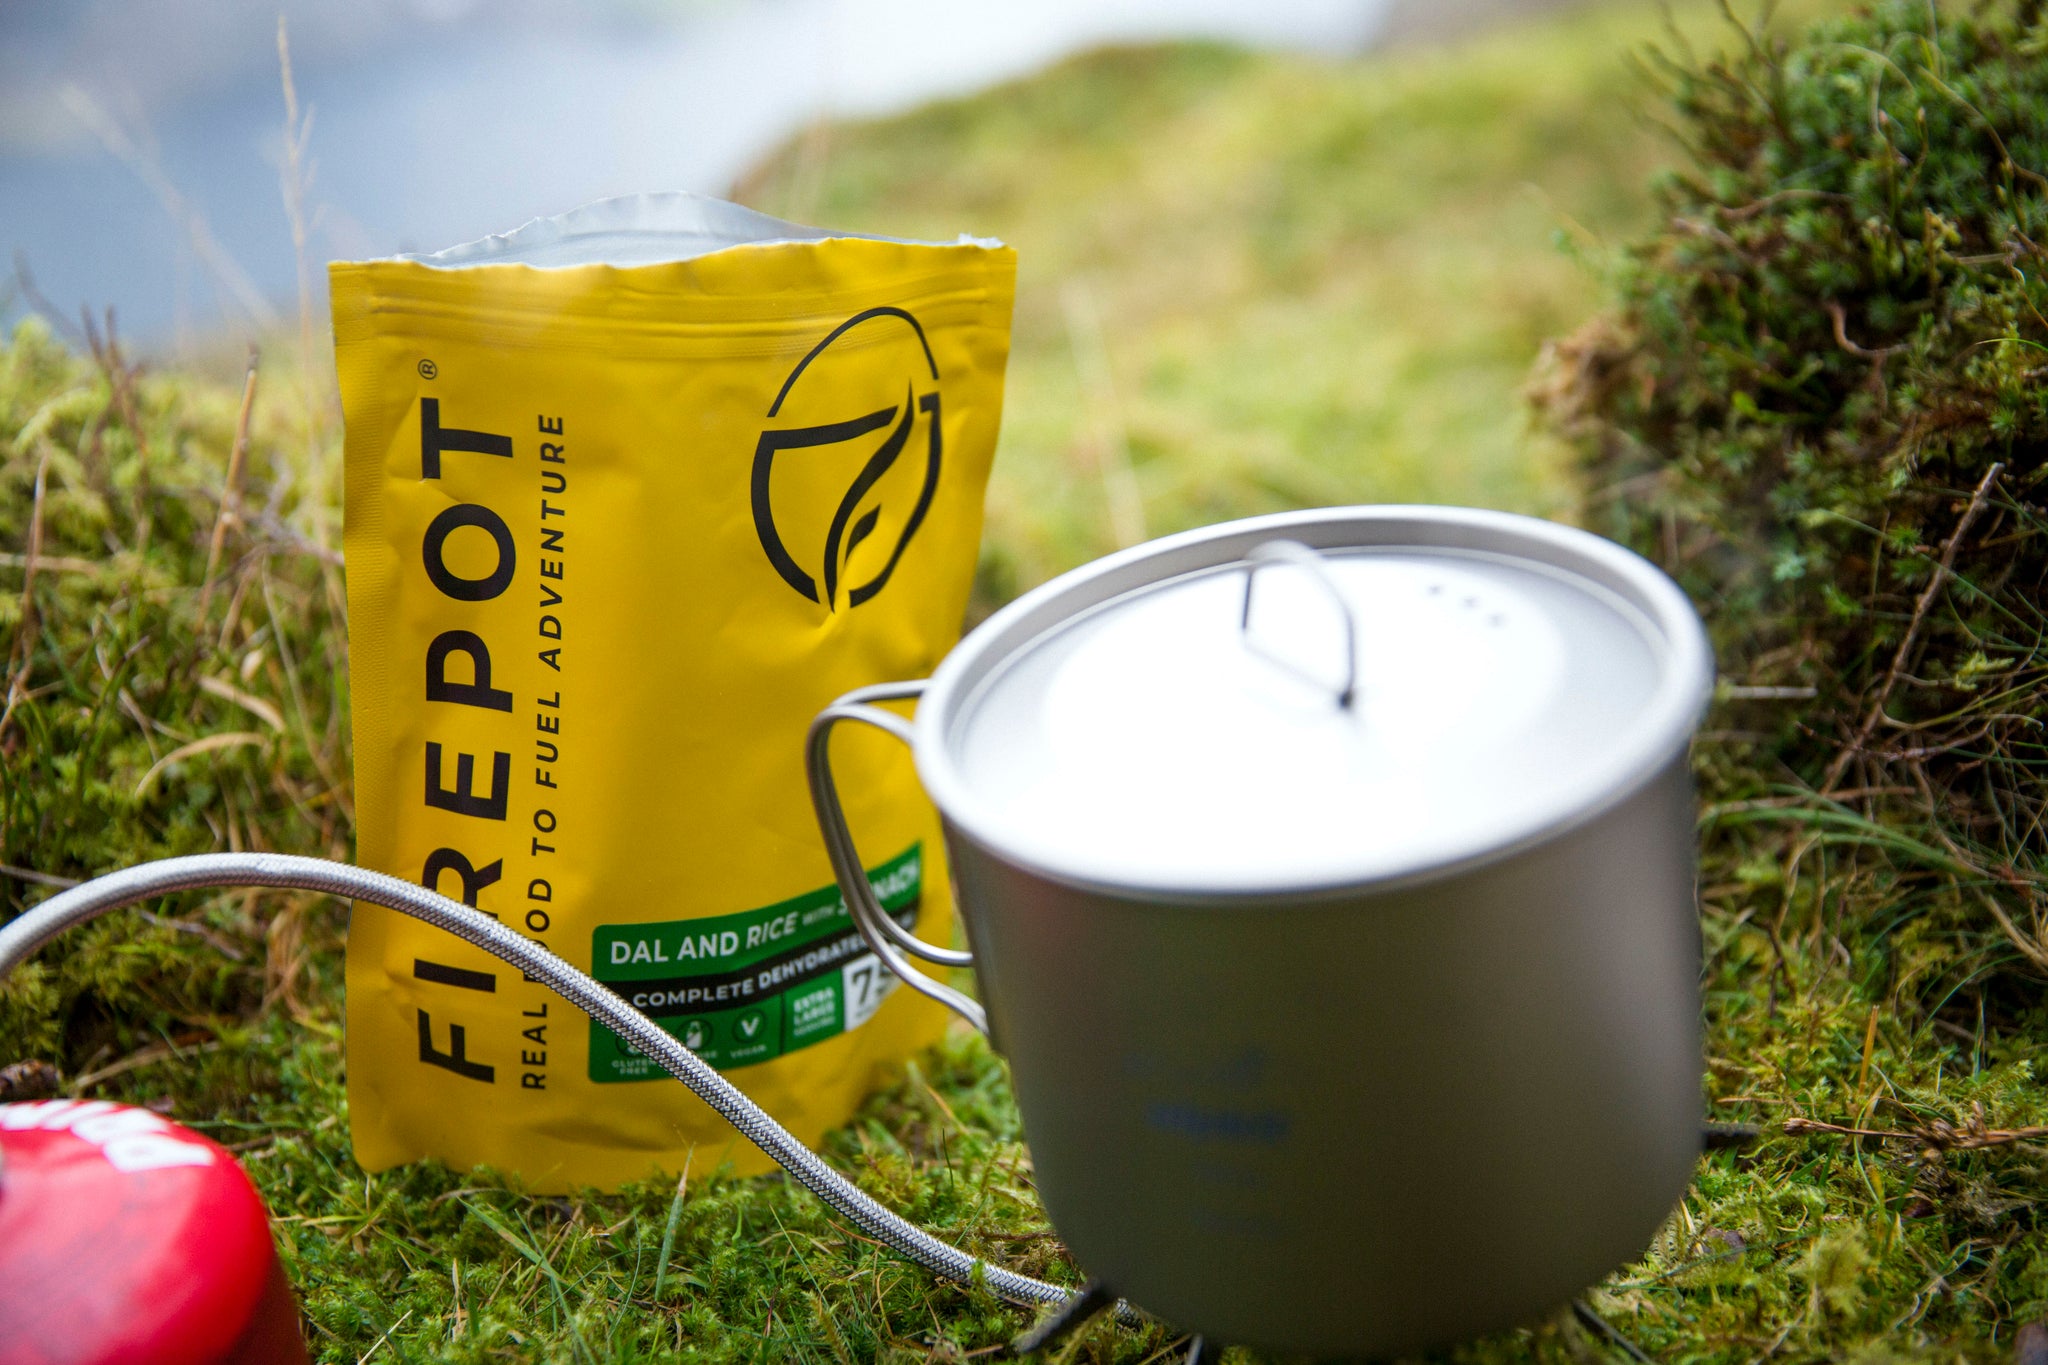 Firepot dehydrated backpacking meal